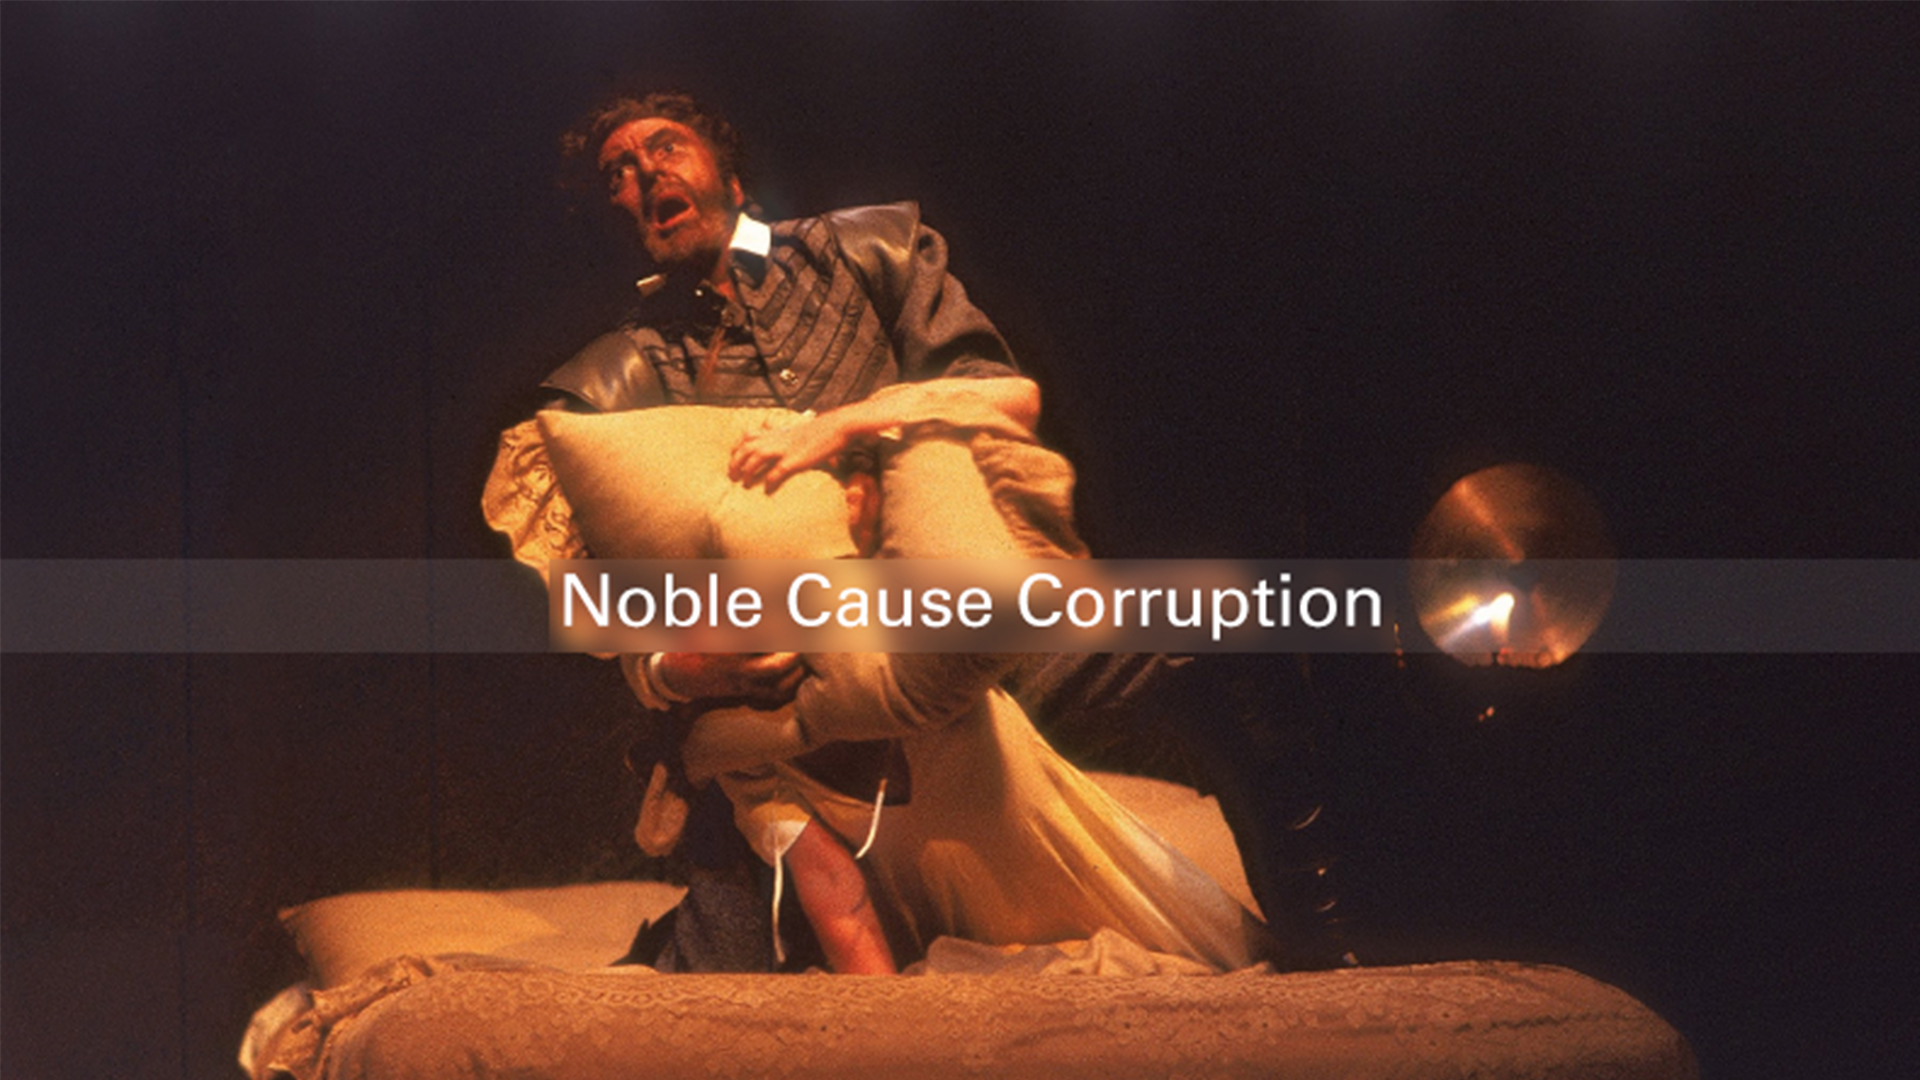 Noble-cause-corruption-in-Othello-by-William-Shakespeare